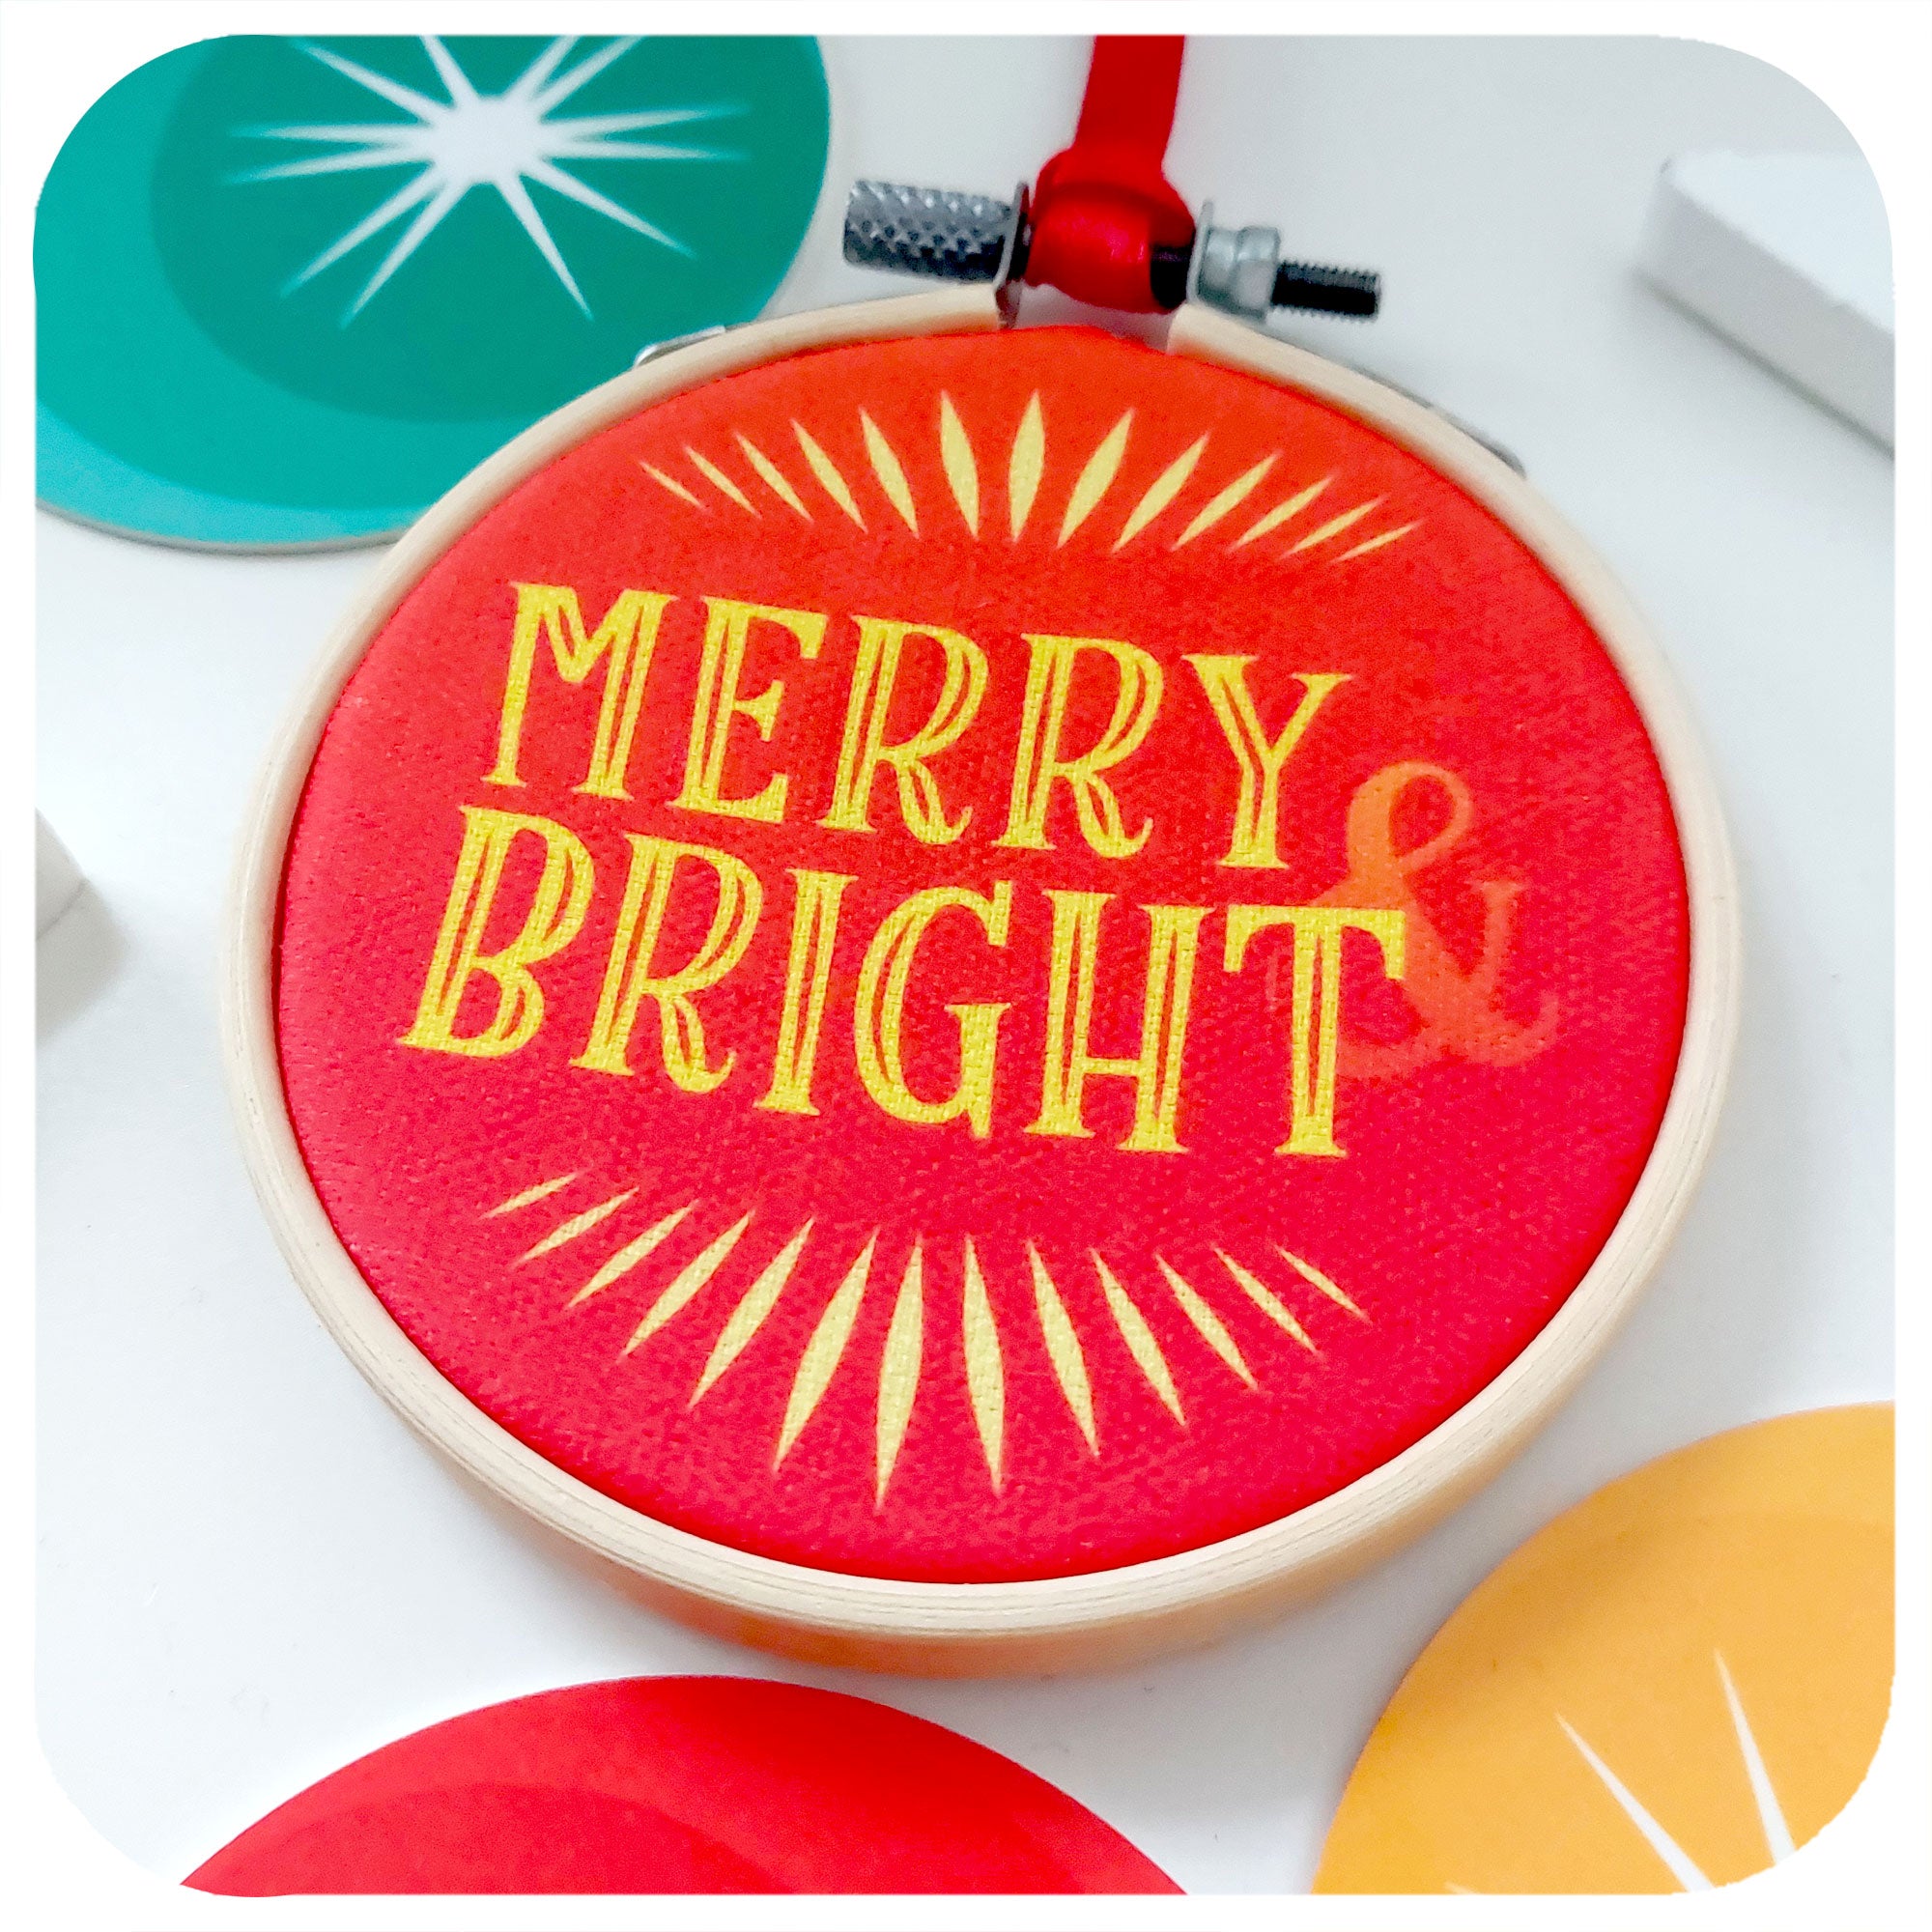 Close up of a retro style christmas tree decoration lies on a white background. Text on ornament reads; Merry & Bright